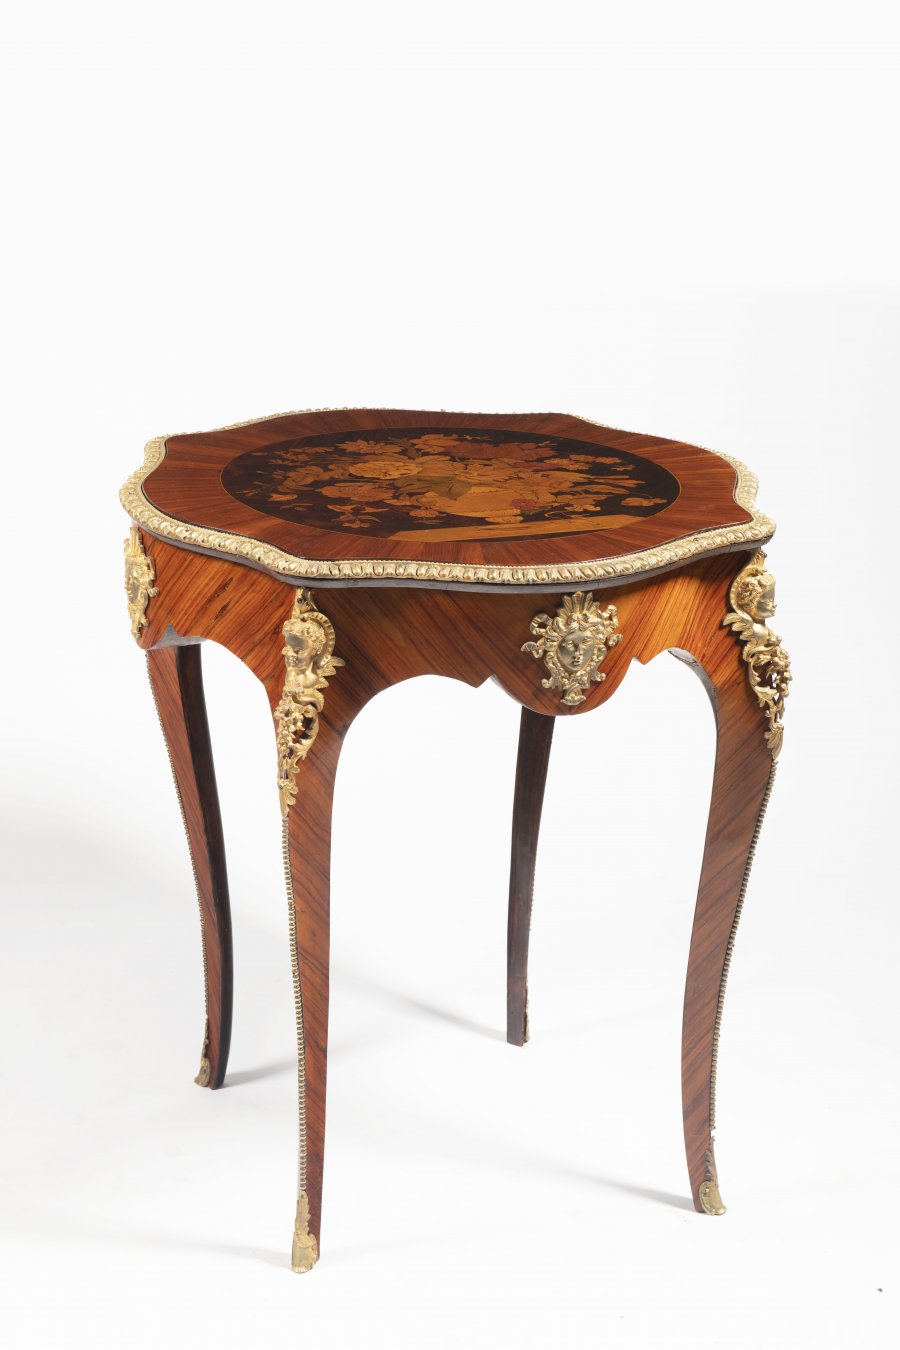 A RICHLY INLAID FRENCH TABLE